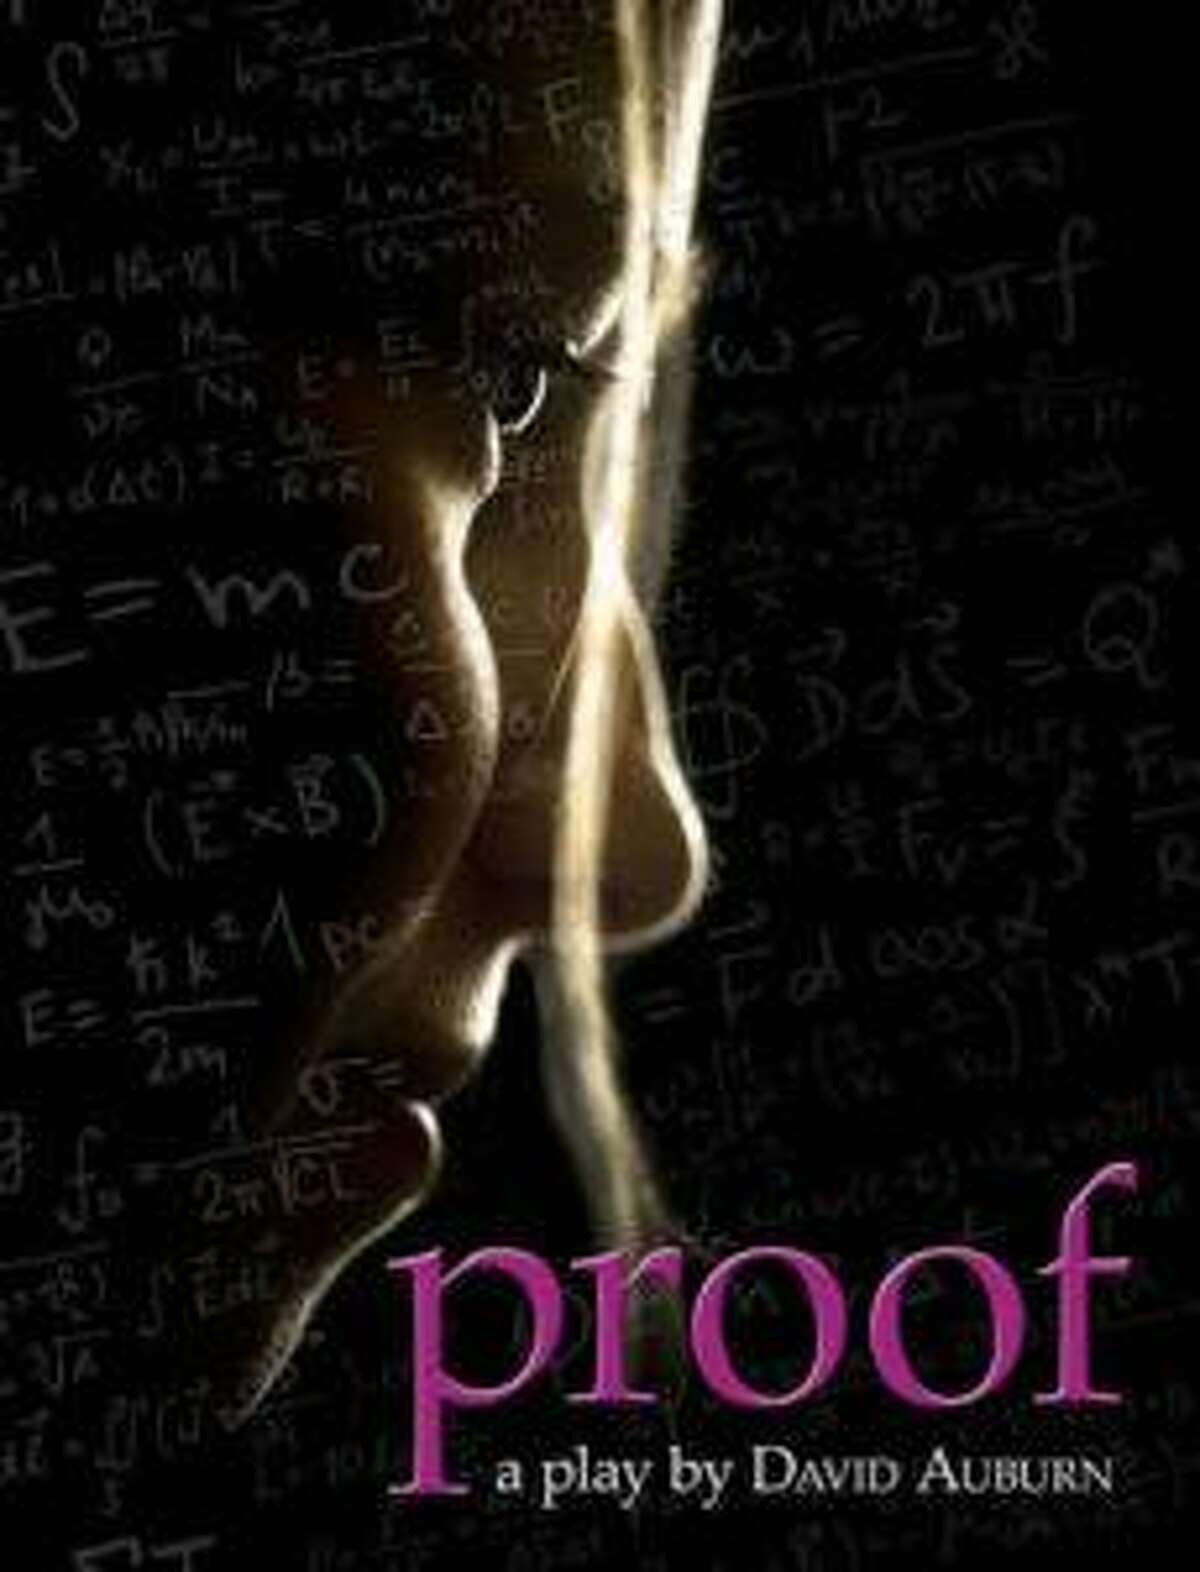 “Proof” is running at the Hudson Stage through mid-April.